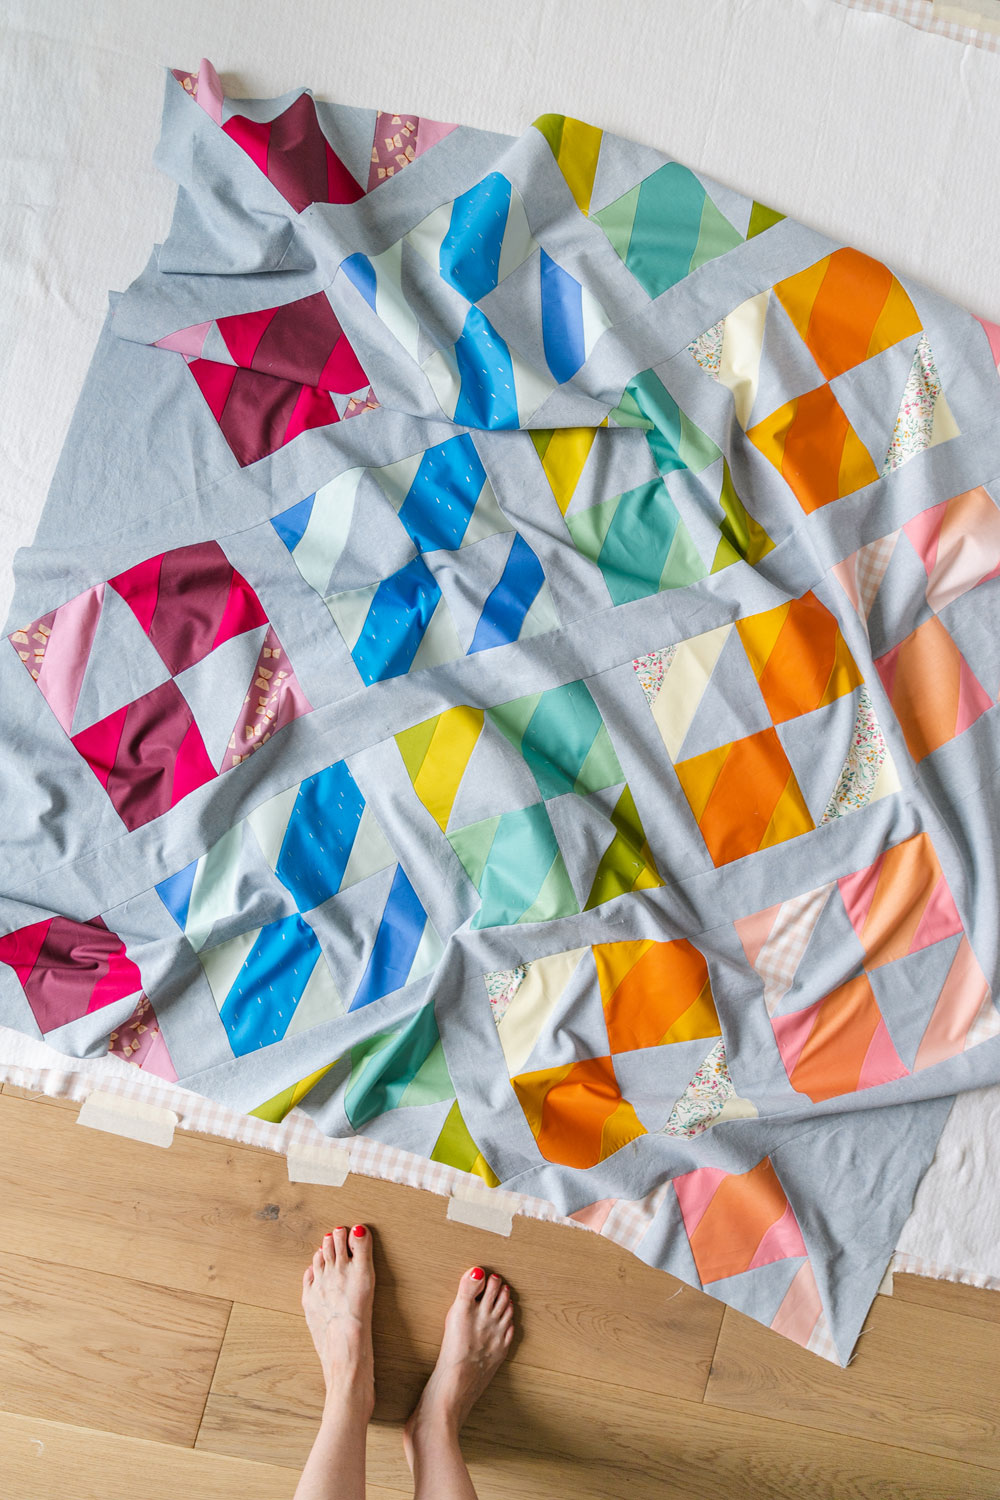 This modern fat quarter quilt pattern is a good beginner quilt pattern and makes a beautiful scrap quilt. The sewing pattern also includes instructions for a limited-color version. suzyquilts.com #quiltpattern #modernquilt